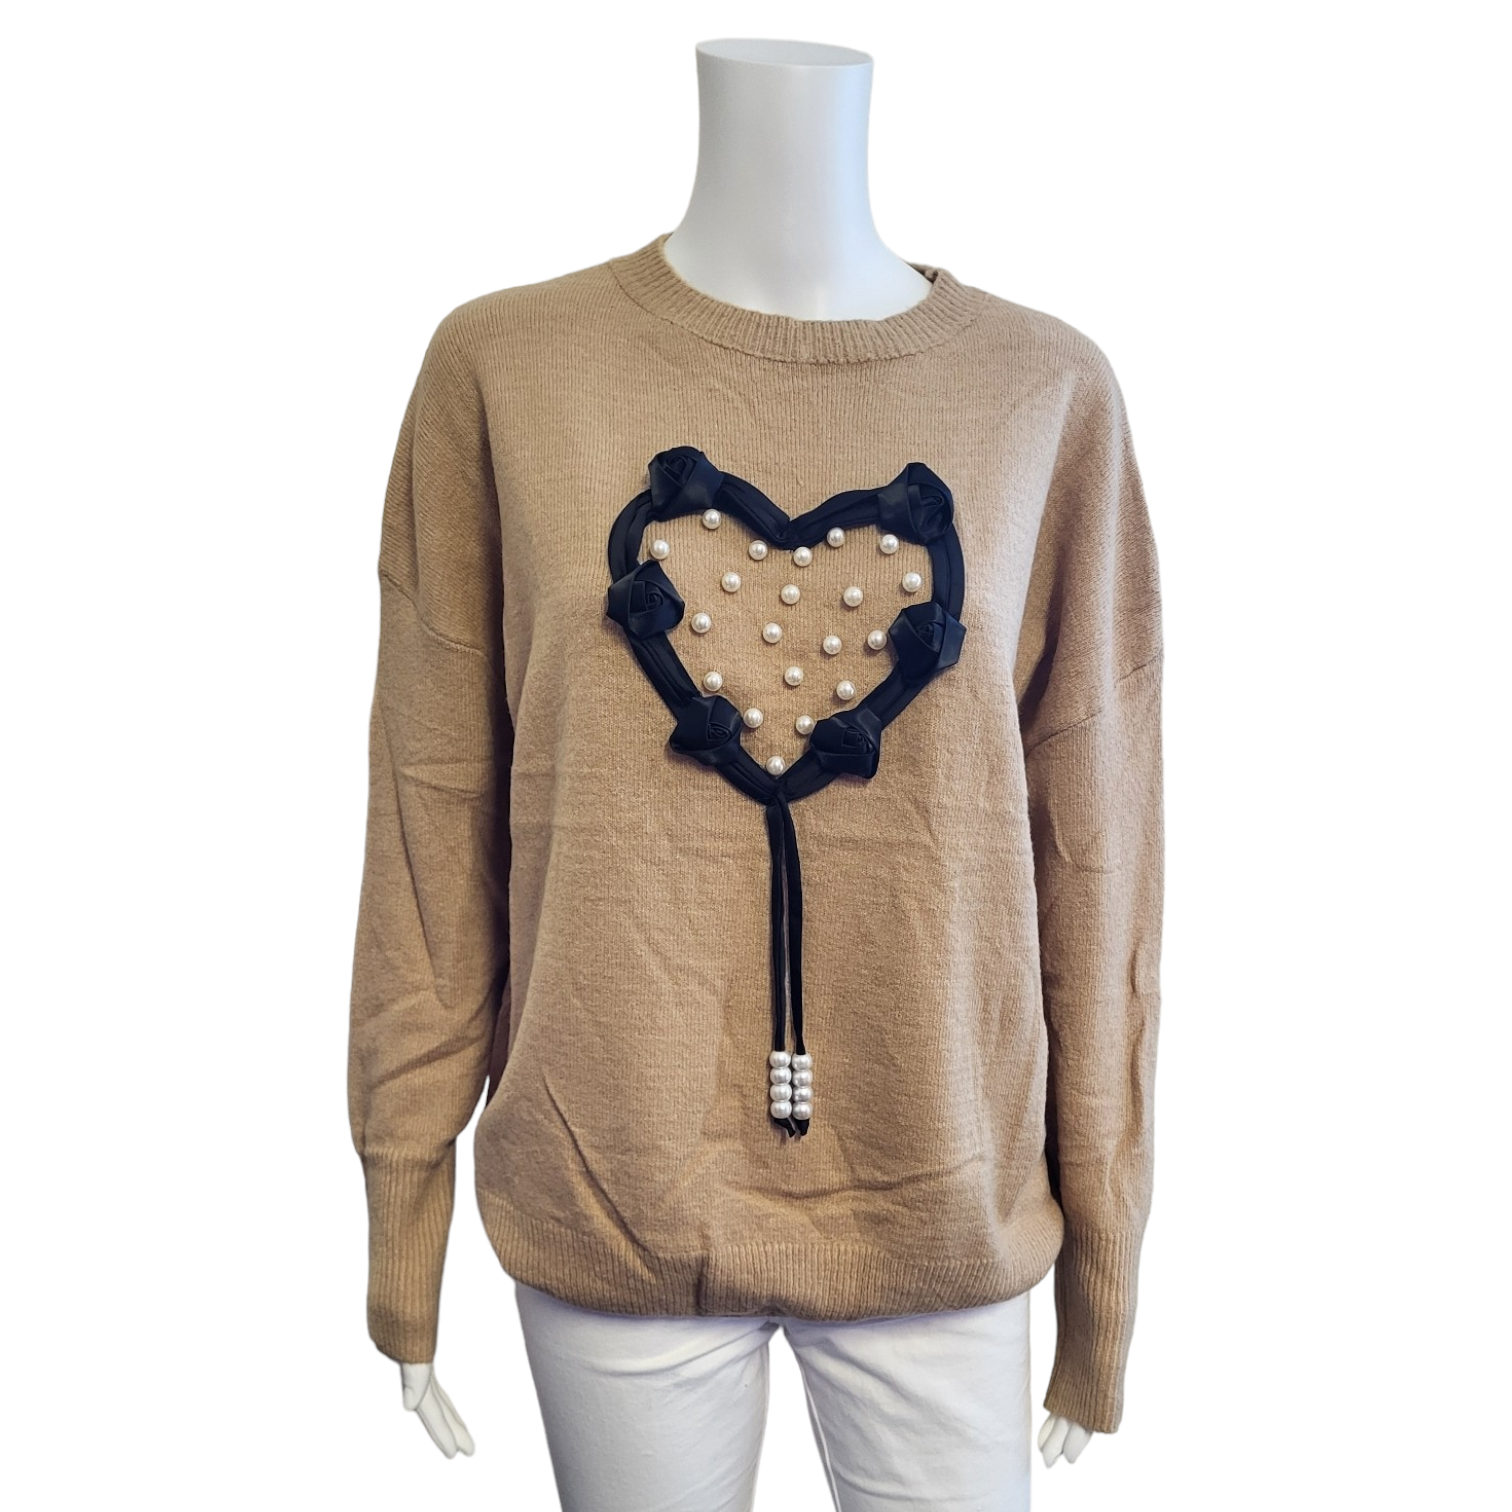 light brown jumper with large black ribbon heart and with pearl detail. long sleeves.